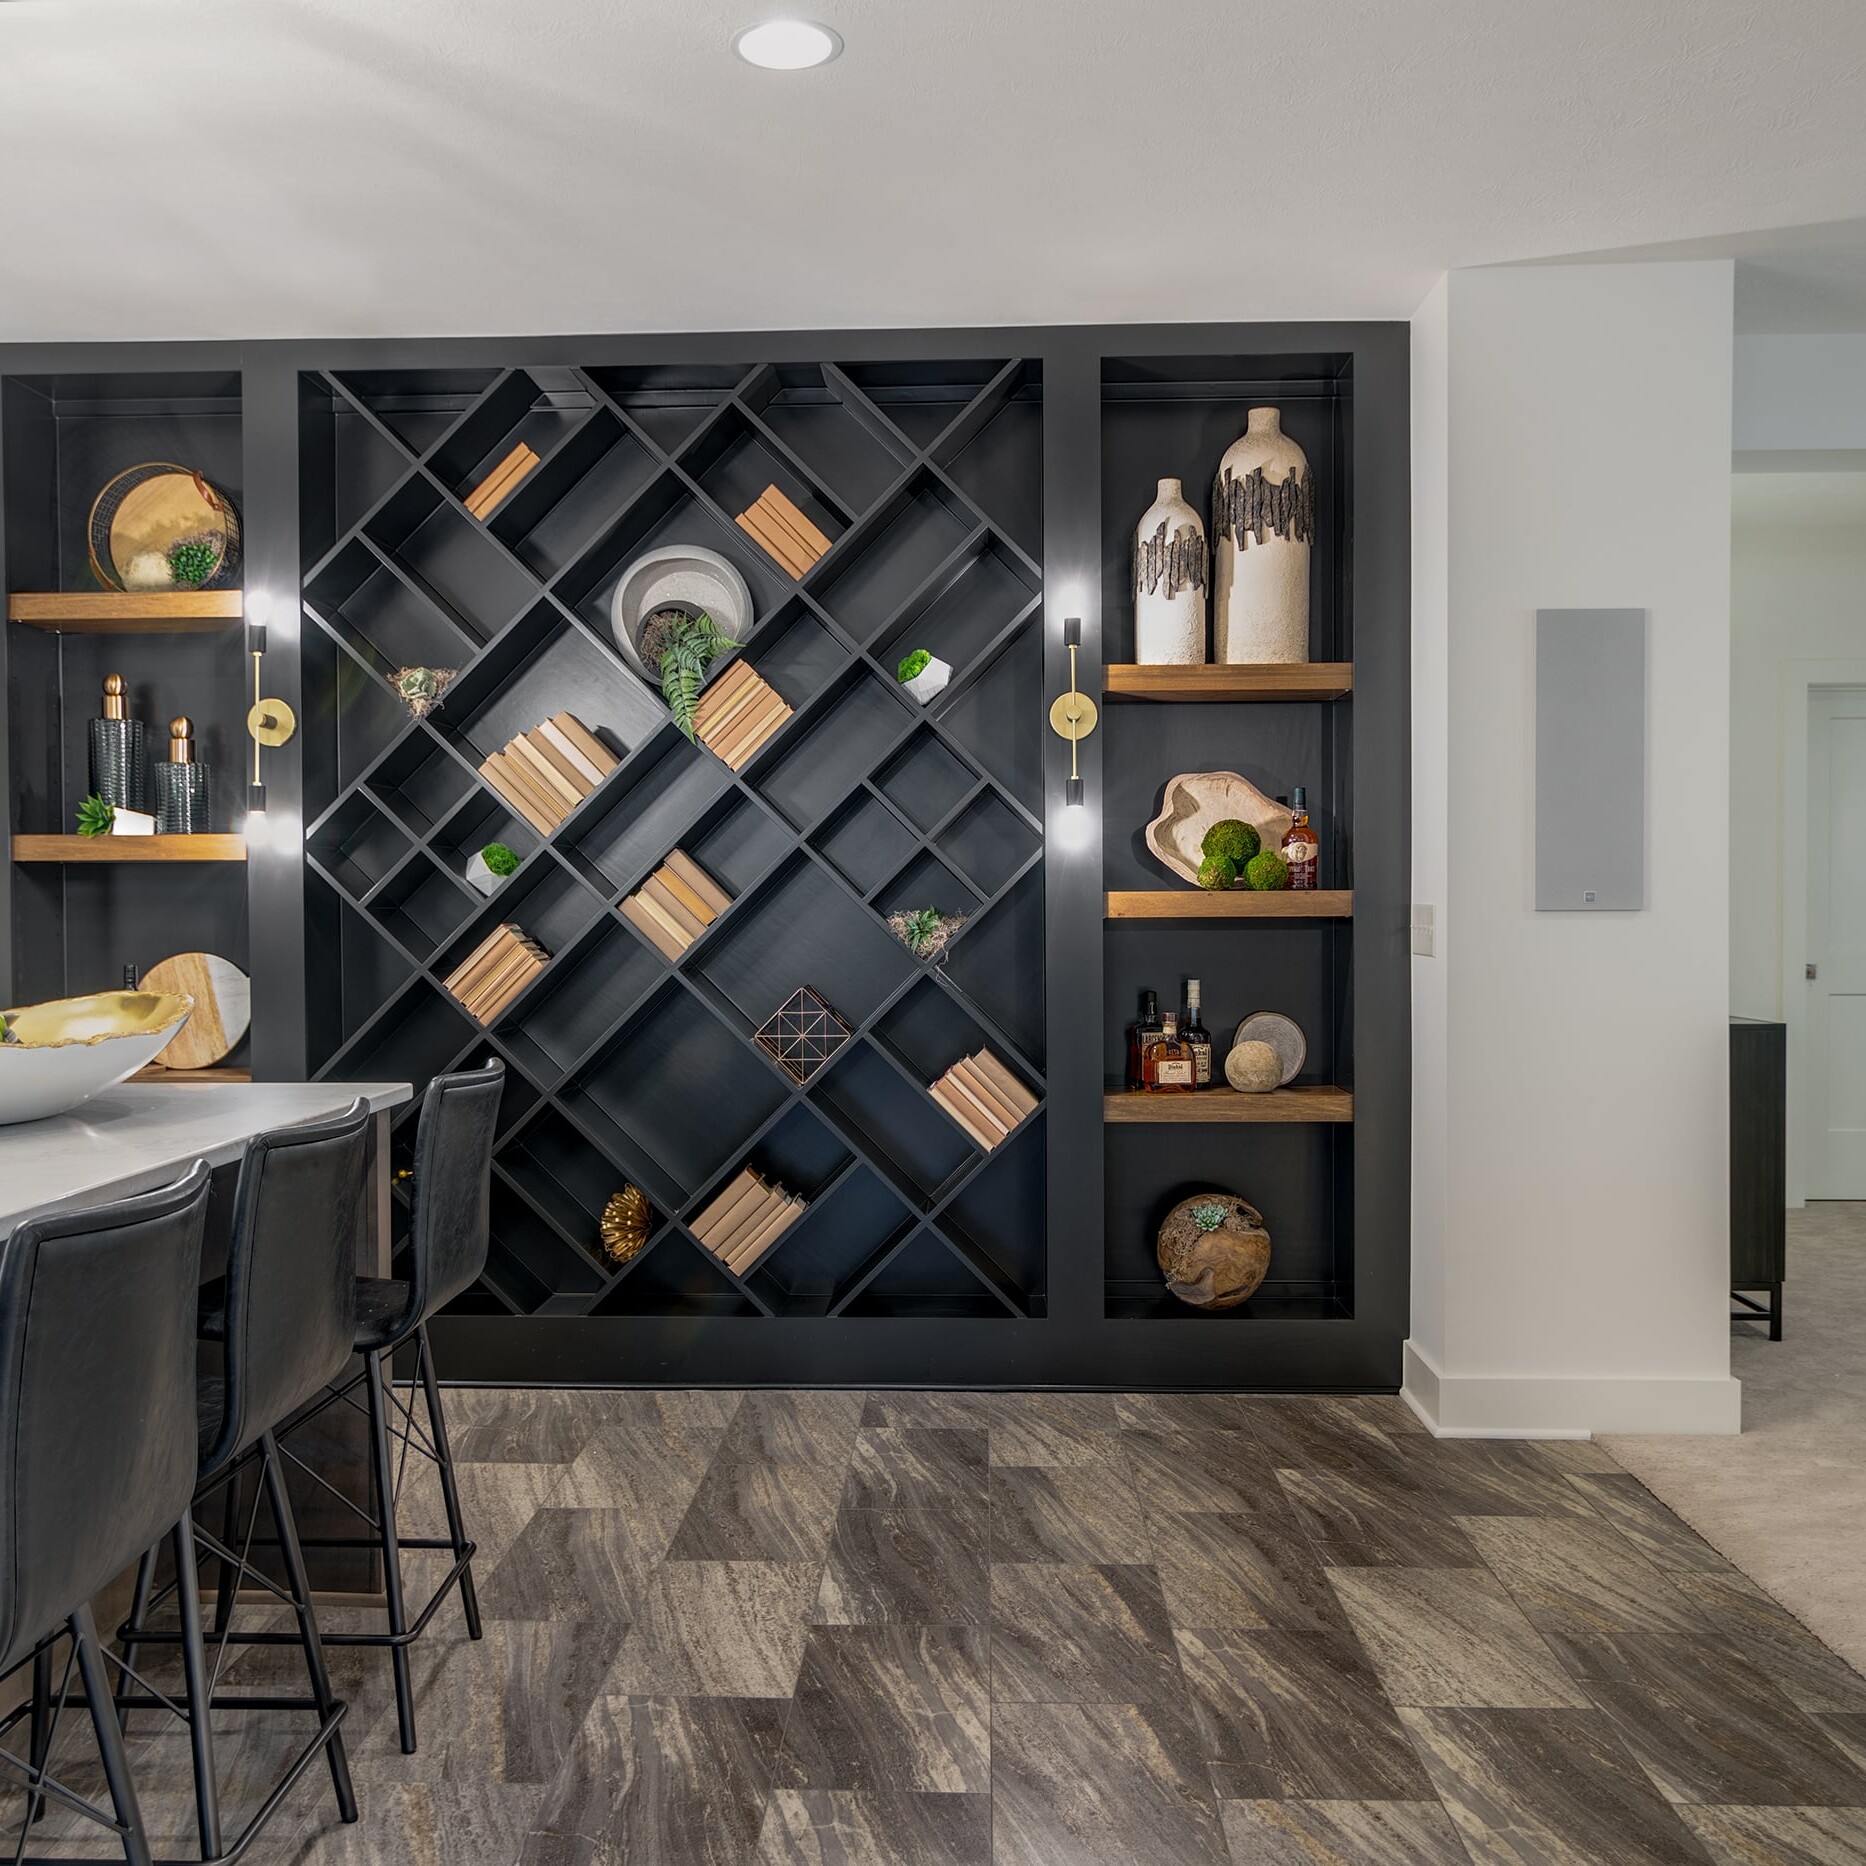 A kitchen with a black wine rack and bar stools.